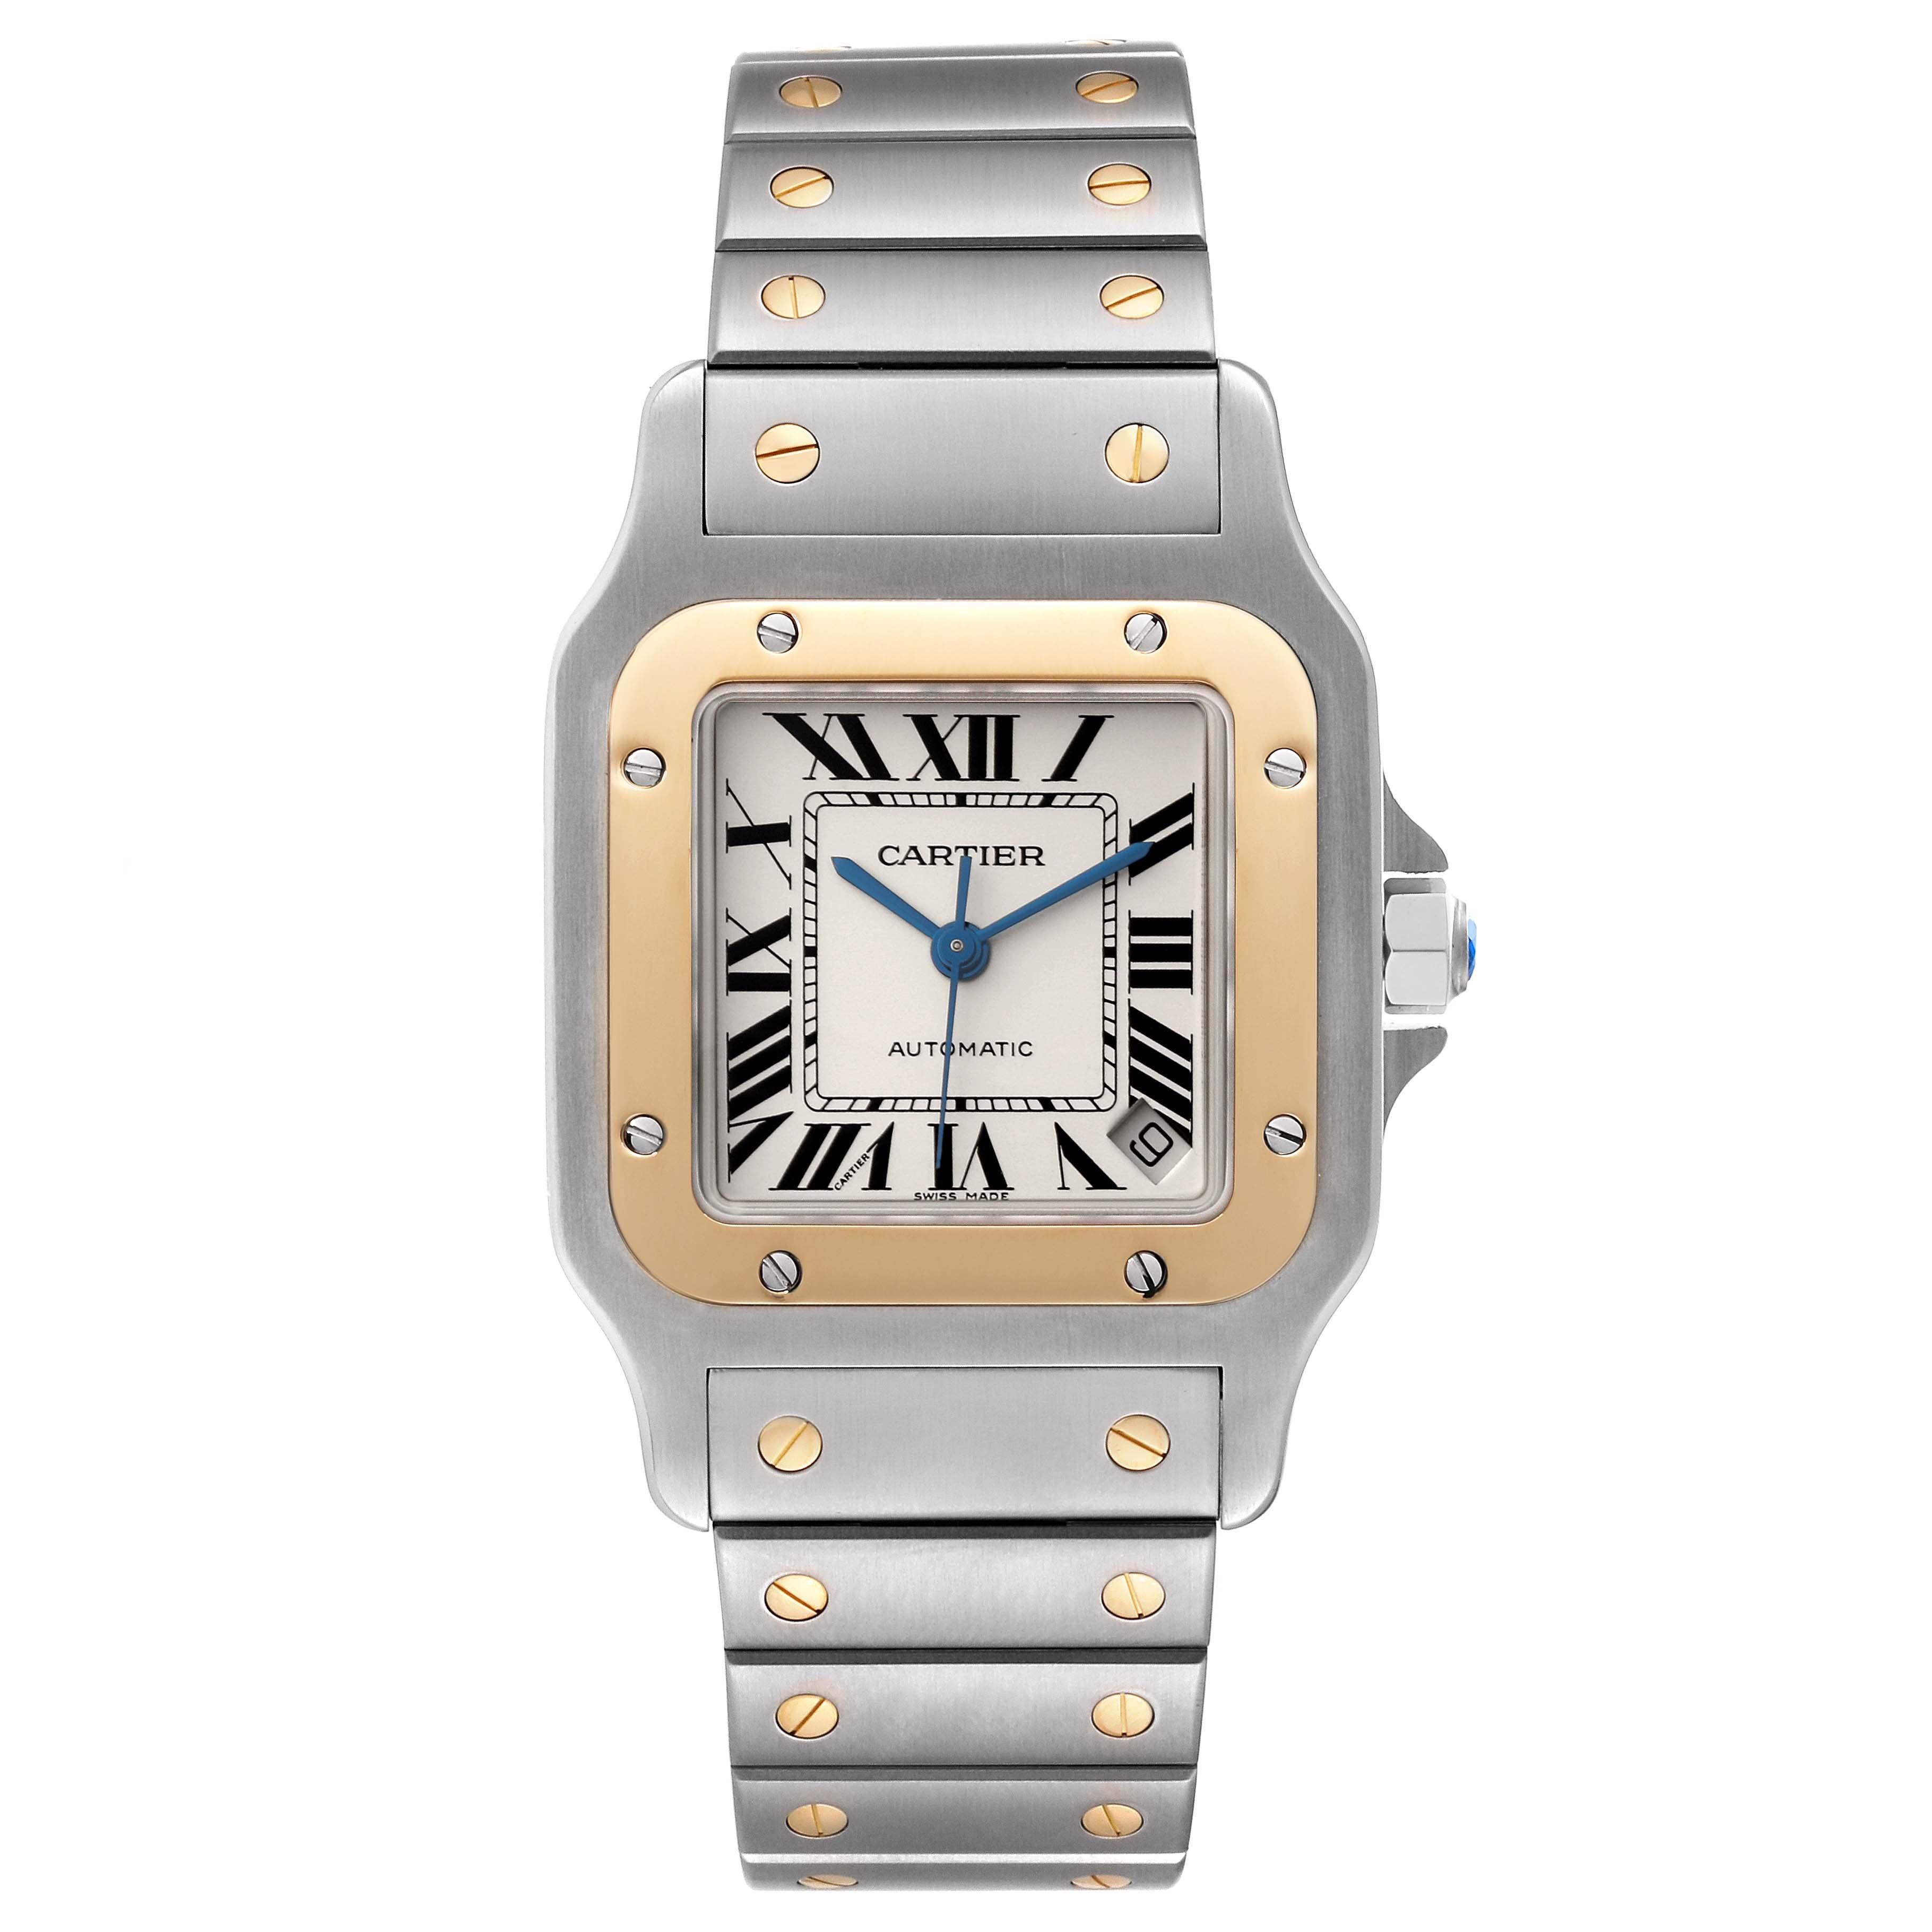 Cartier Santos Galbee XL Steel Yellow Gold Mens Watch W20099C4. Automatic self-winding movement, Caliber 049. Brushed and polished stainless steel case 32 X 45 mm. Stainless steel protected octagonal crown set with a faceted blue spinel cabochon.